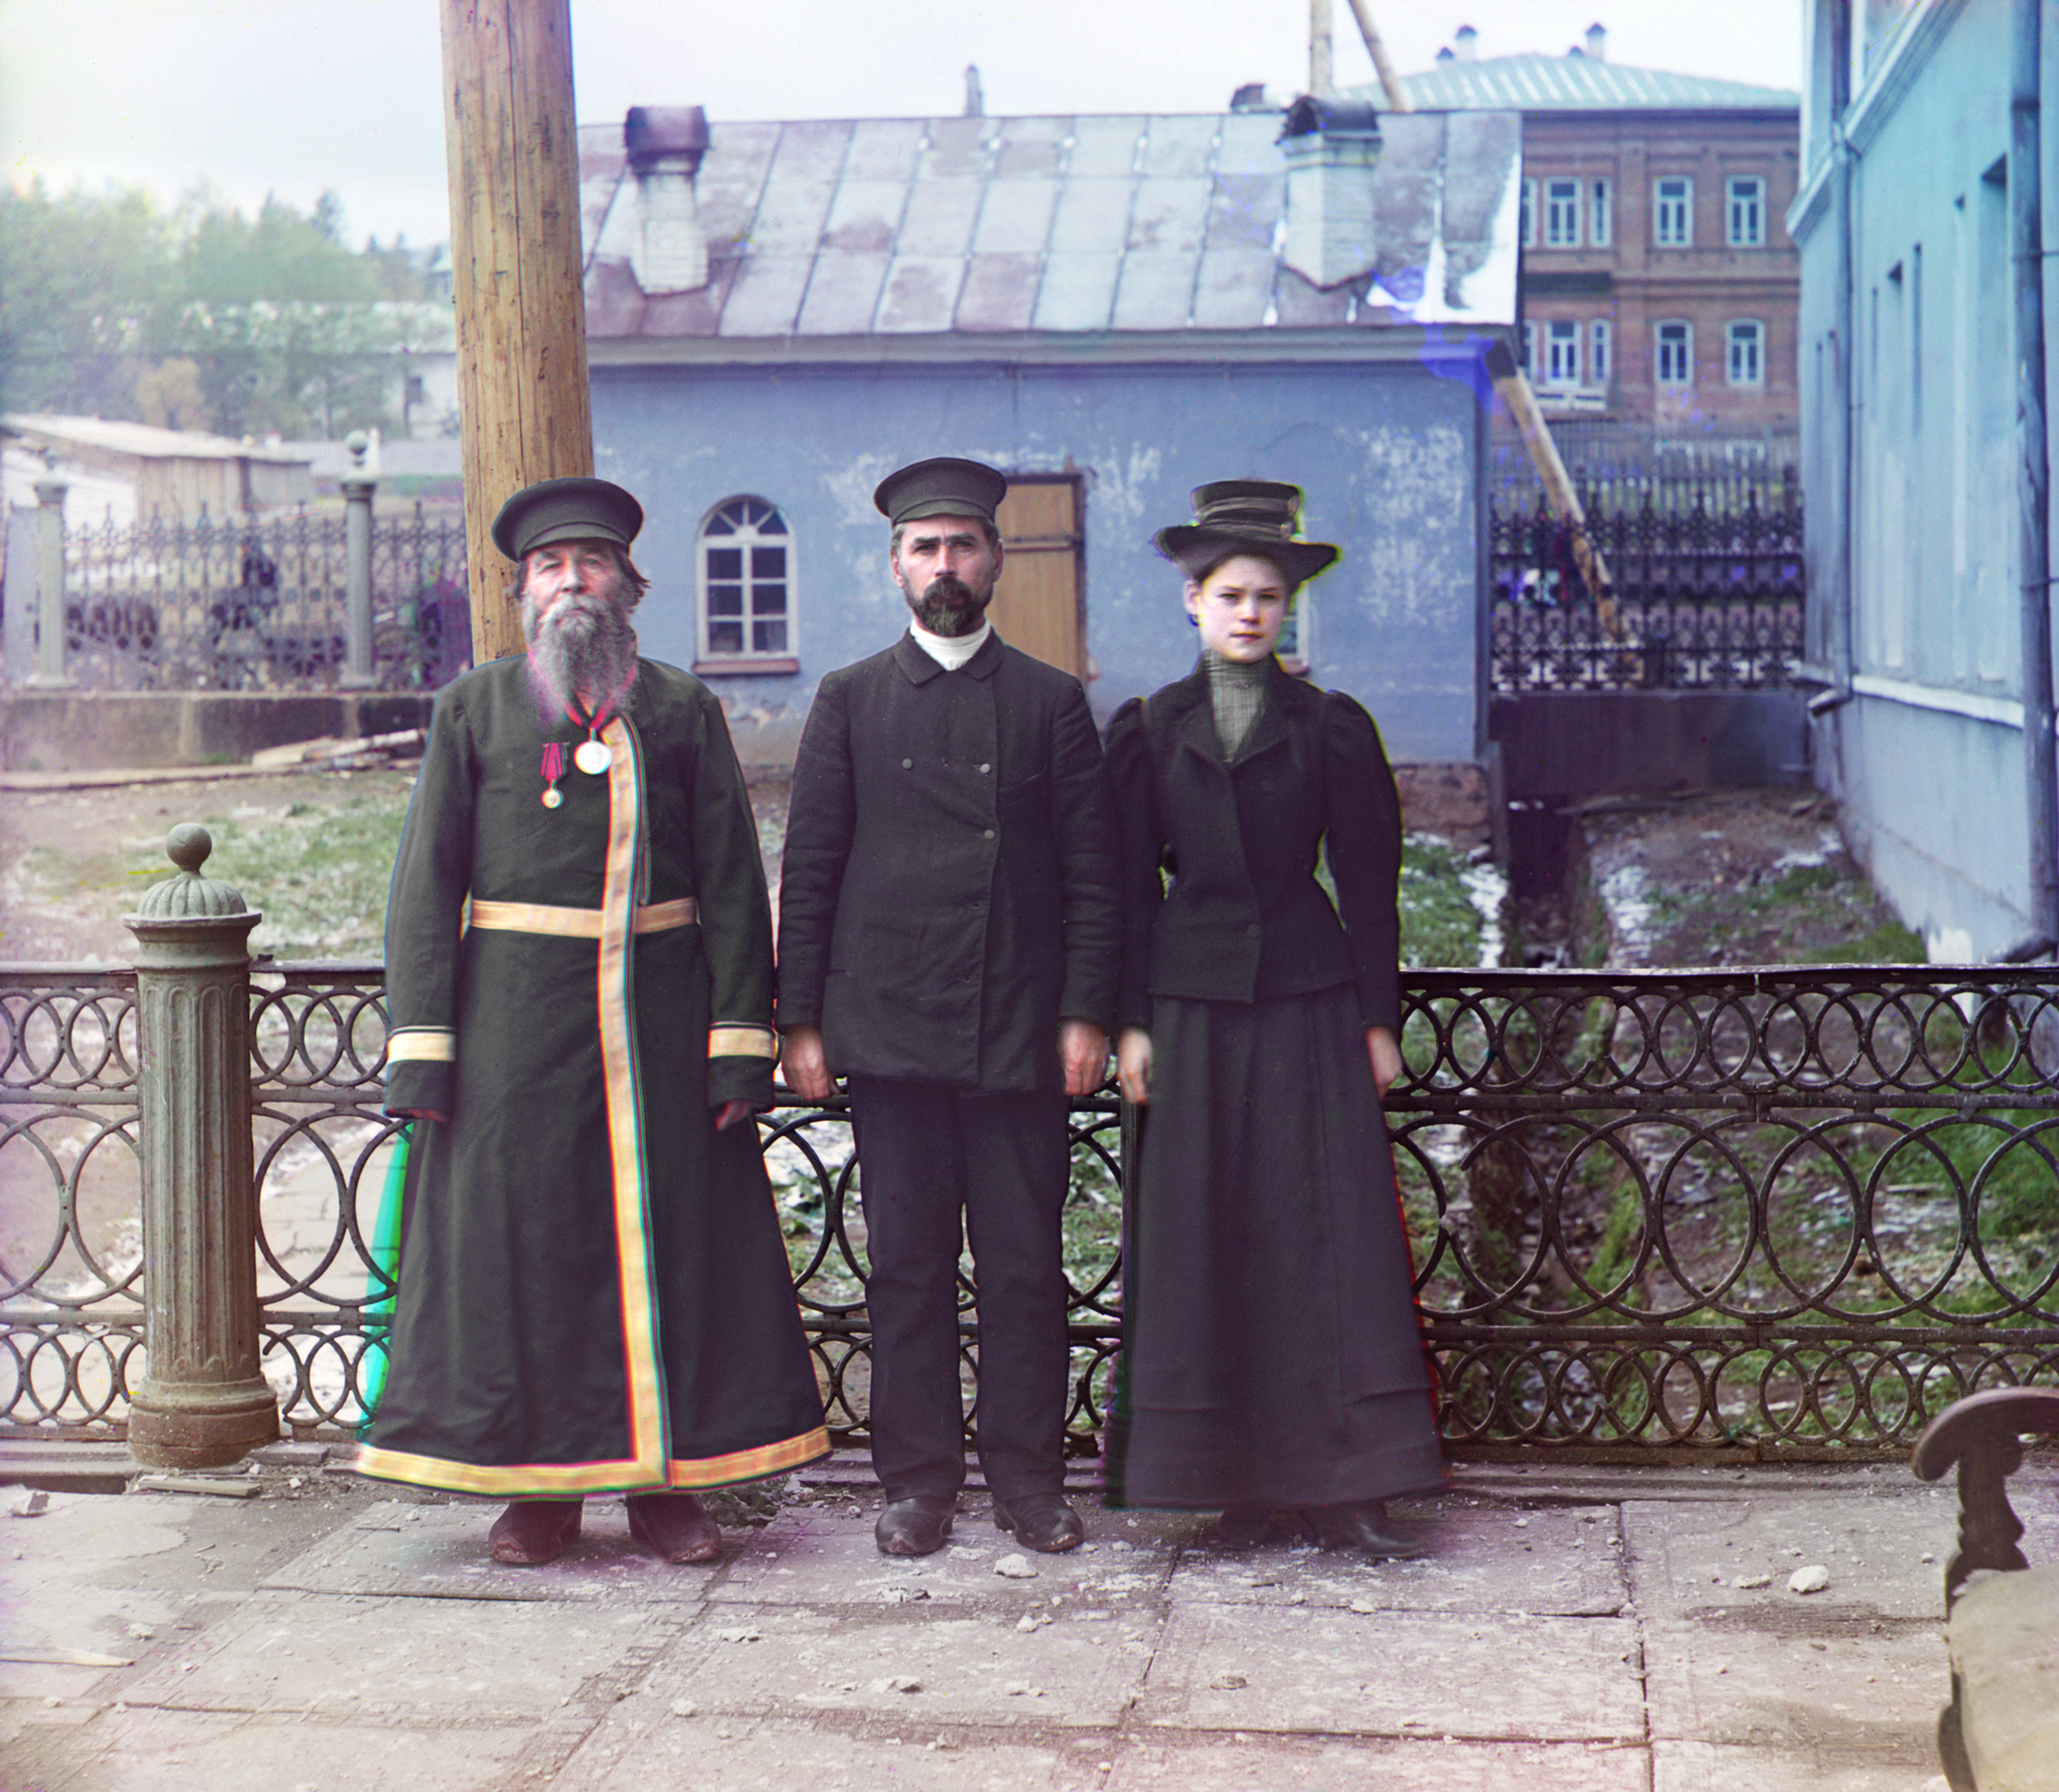 Piotr Kalganov posing with his son Igor and granddaughter Irina in the town of Zlatoust in the Ural Mountain region of Russia. 1910.jpg